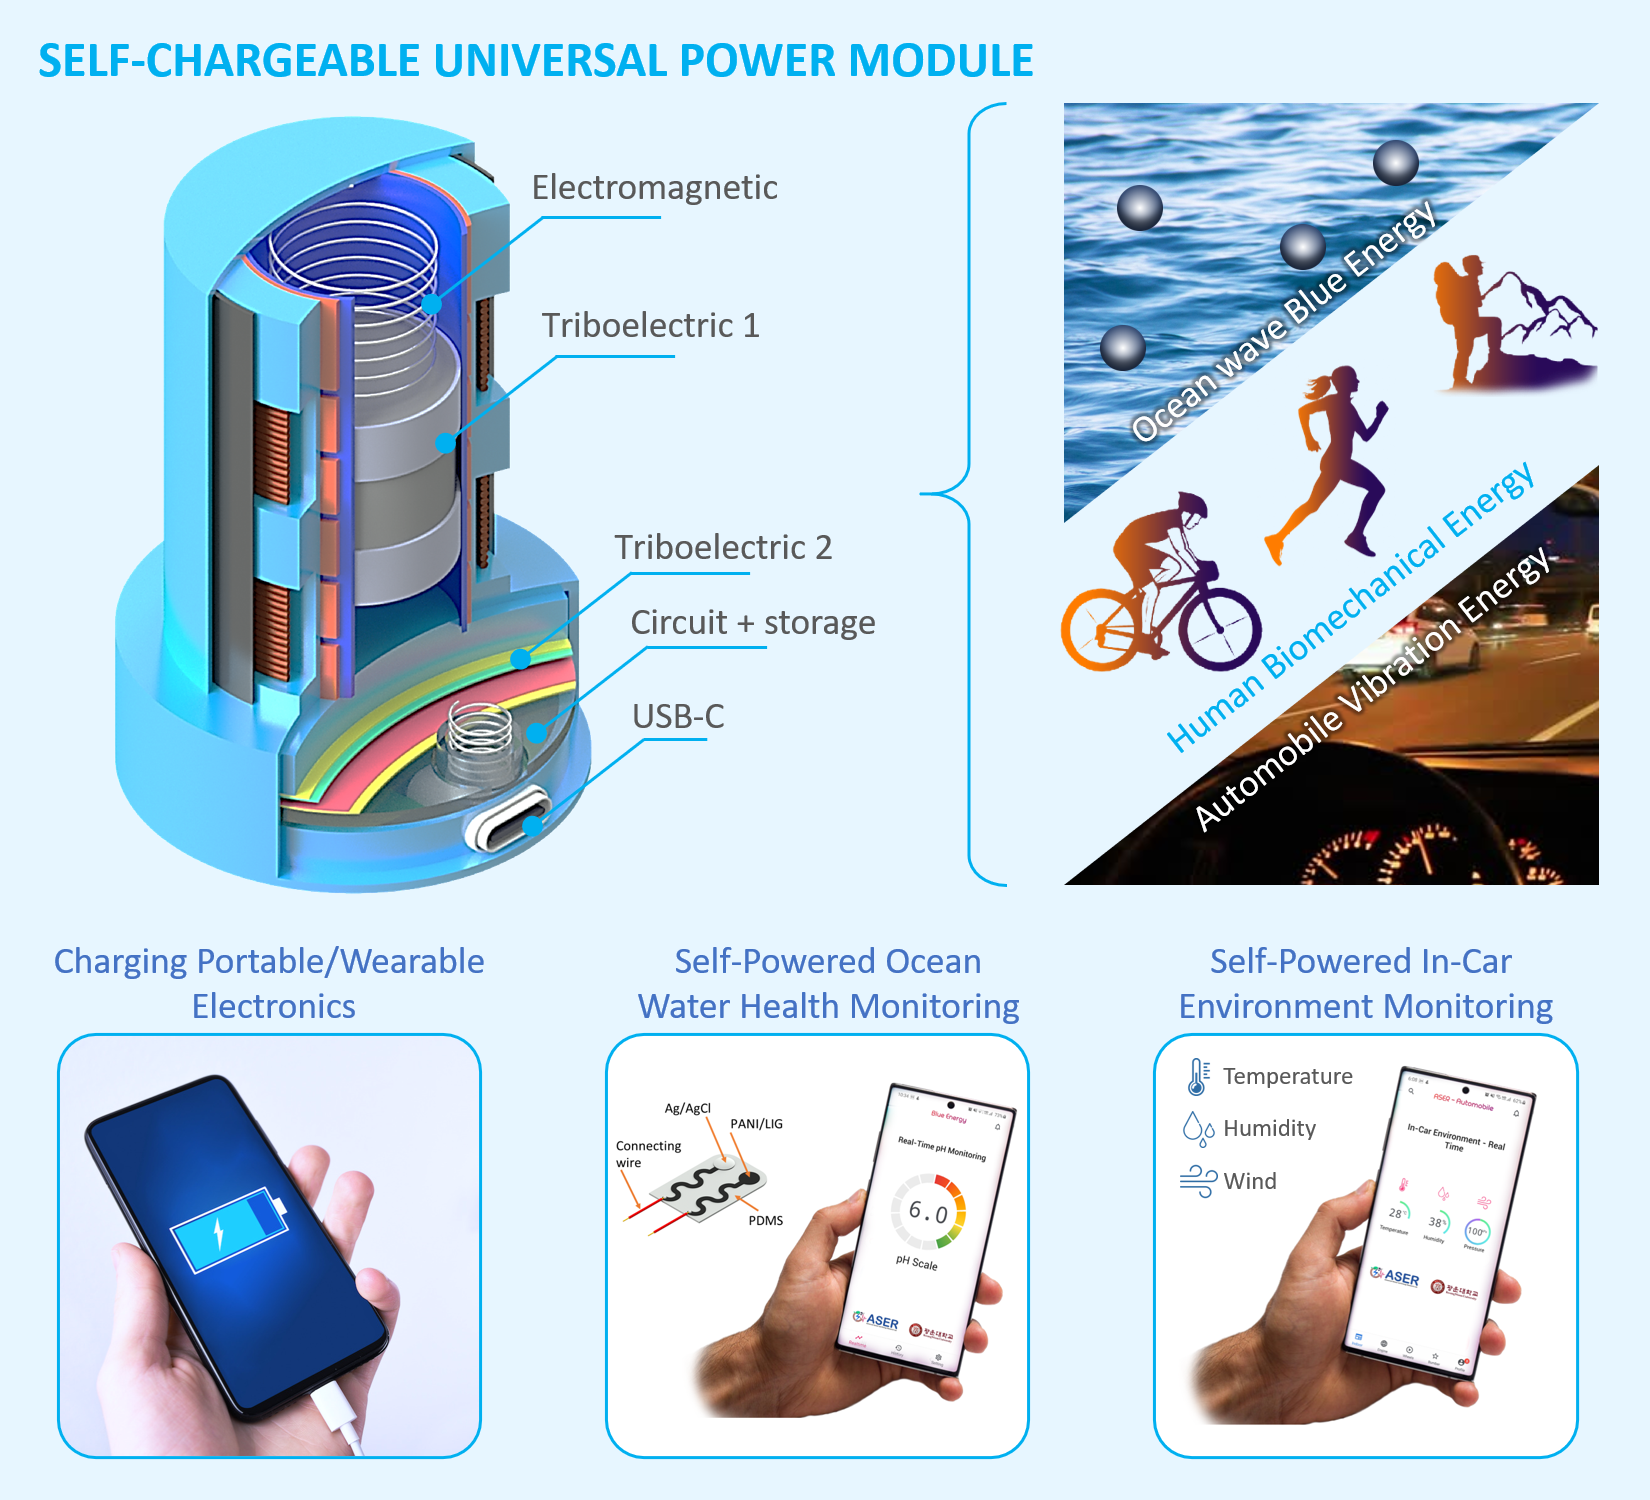 A Fully Functional Universal Self‐Chargeable Power Module for Portable/Wearable Electronics and Self‐Powered IoT Applications